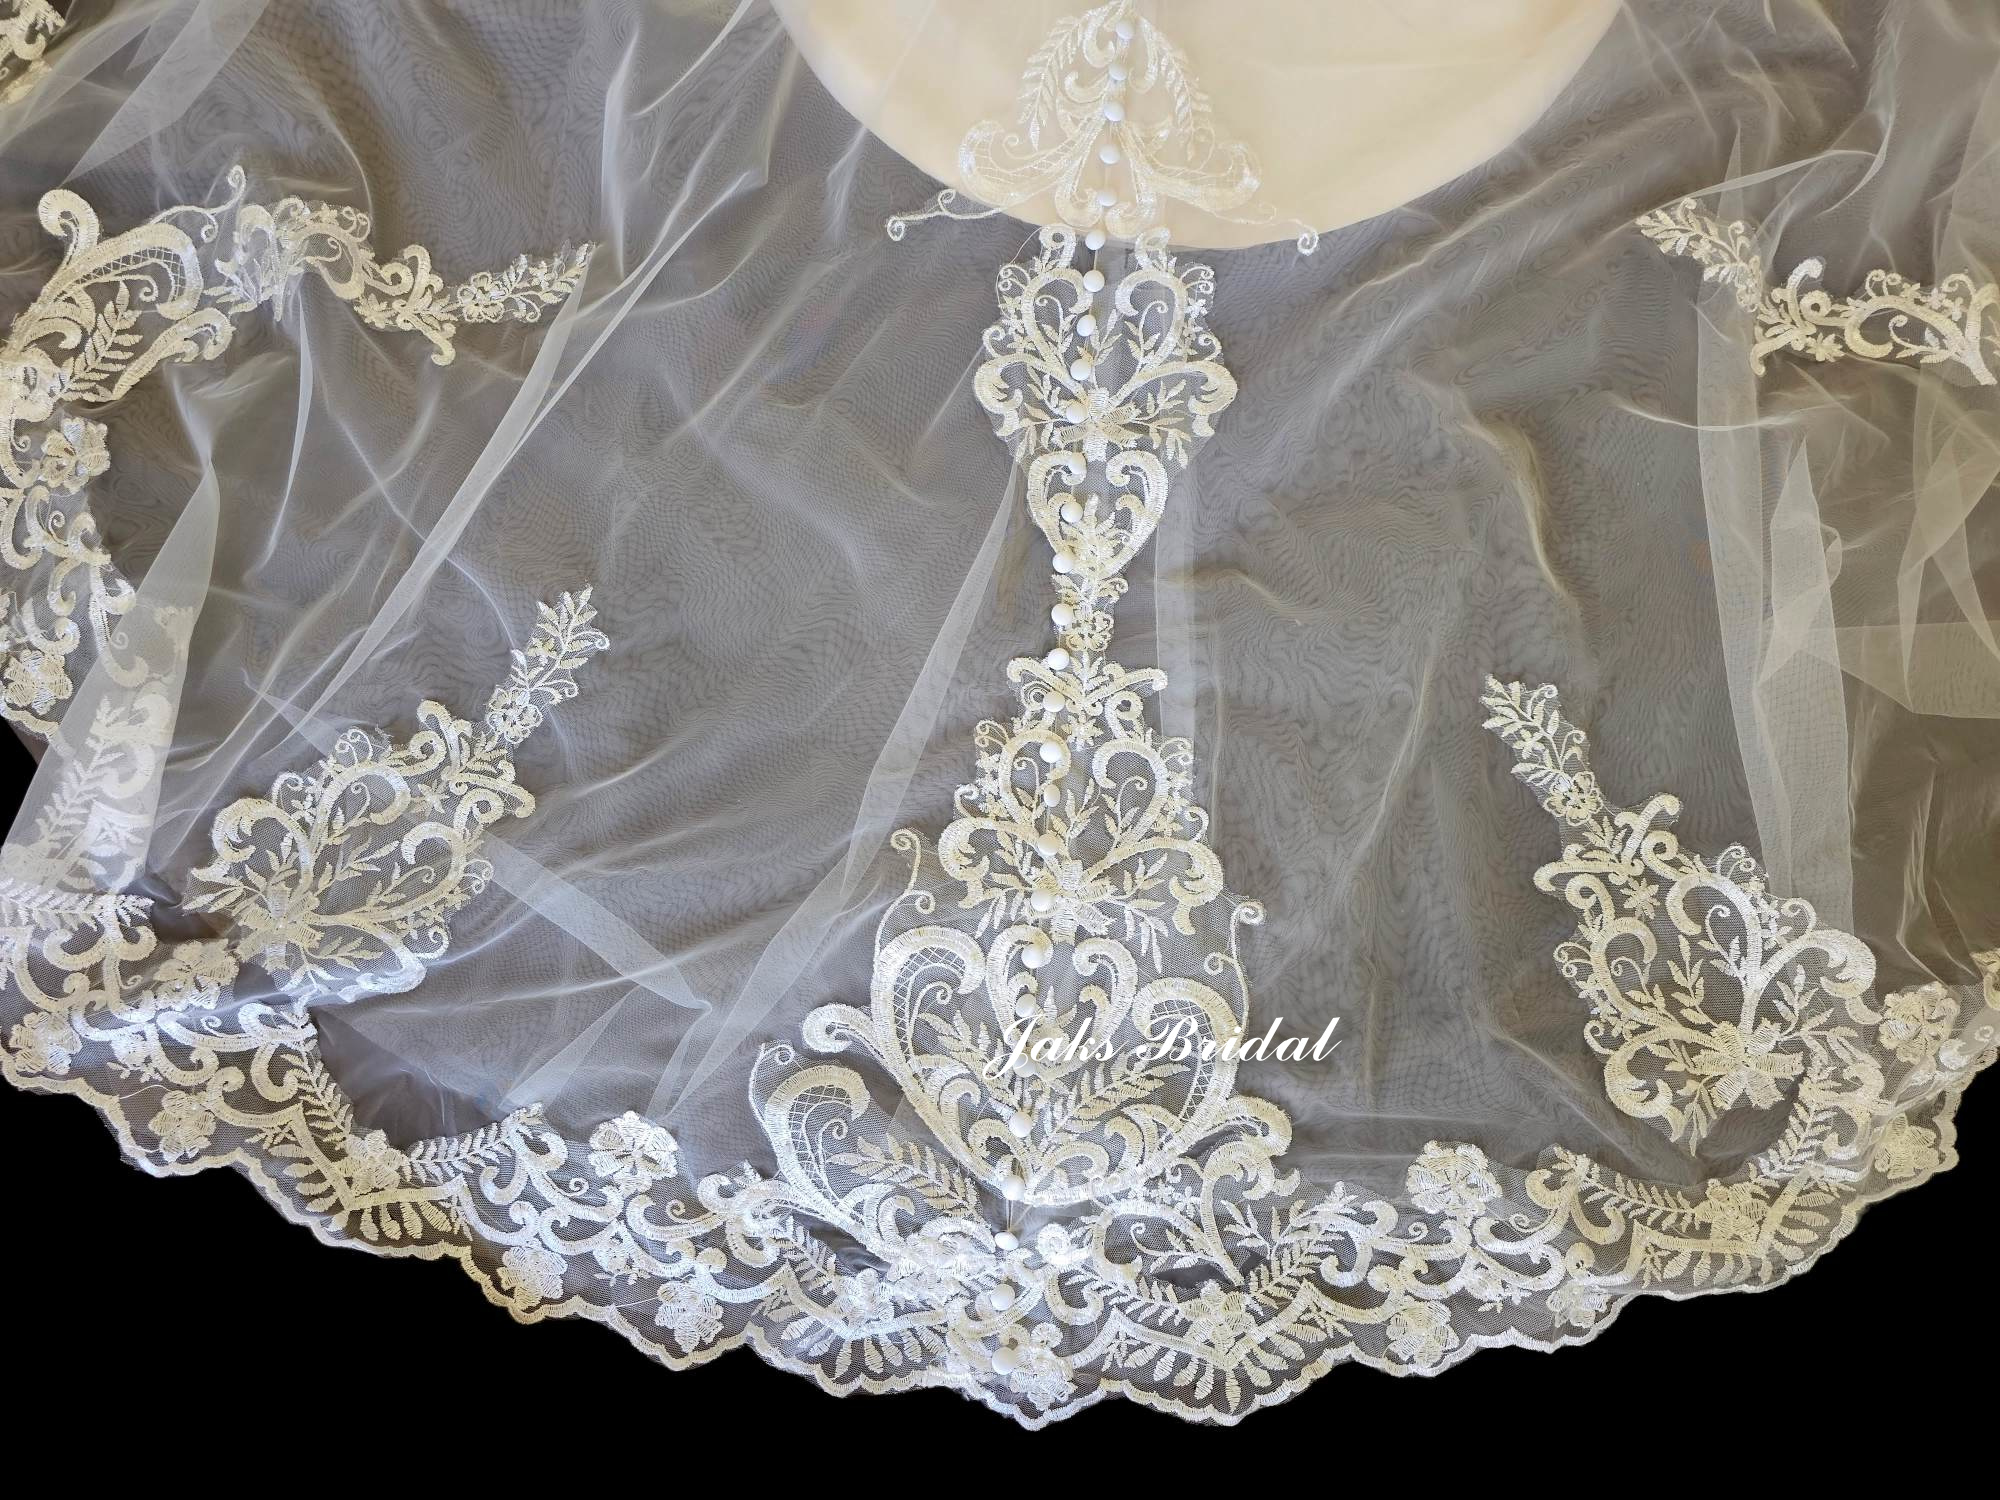 lace appliques placed over tulle train